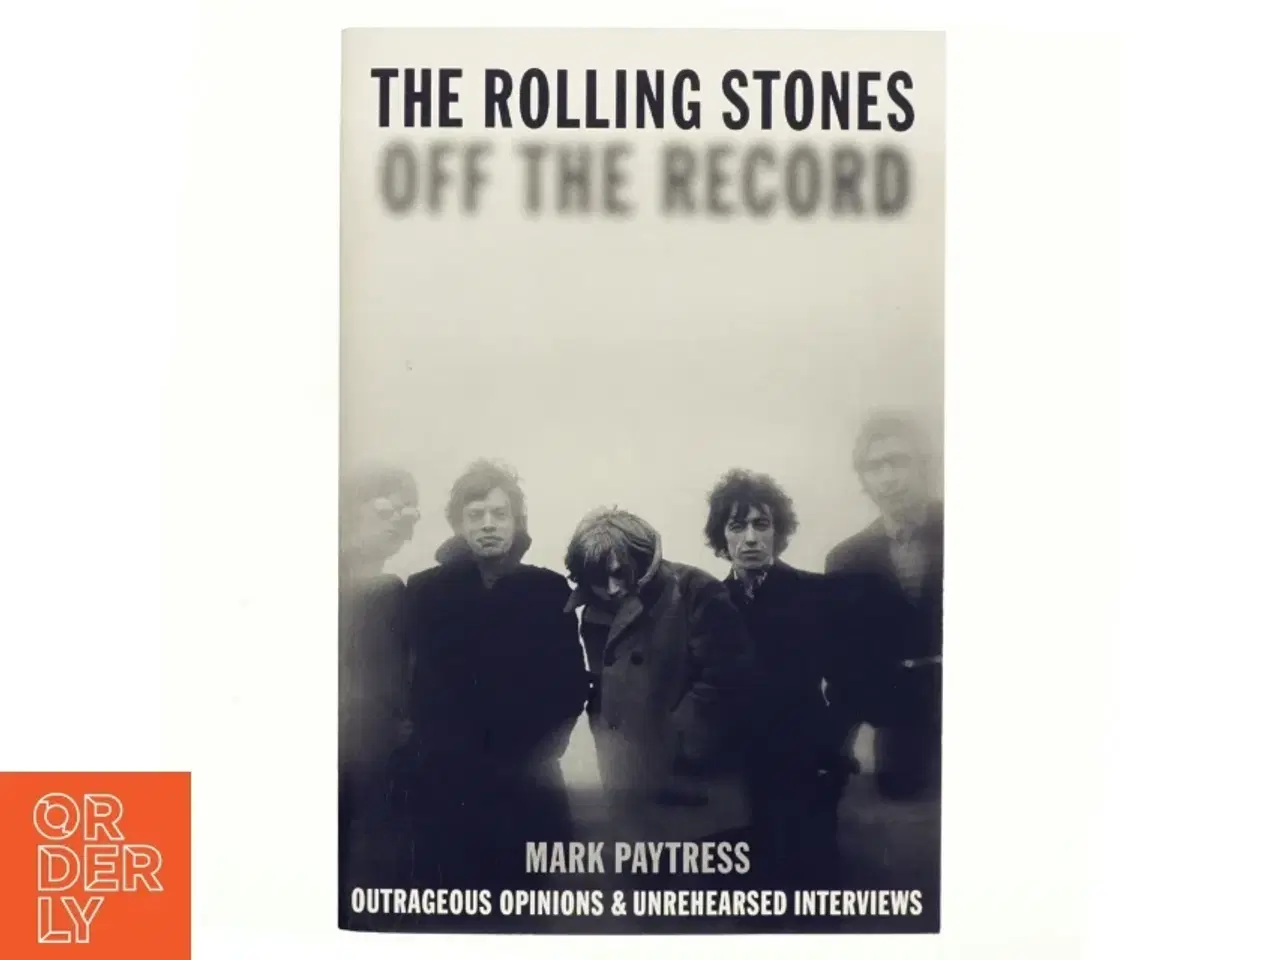 Billede 1 - The Rolling Stones, off the record af Mark Paytress